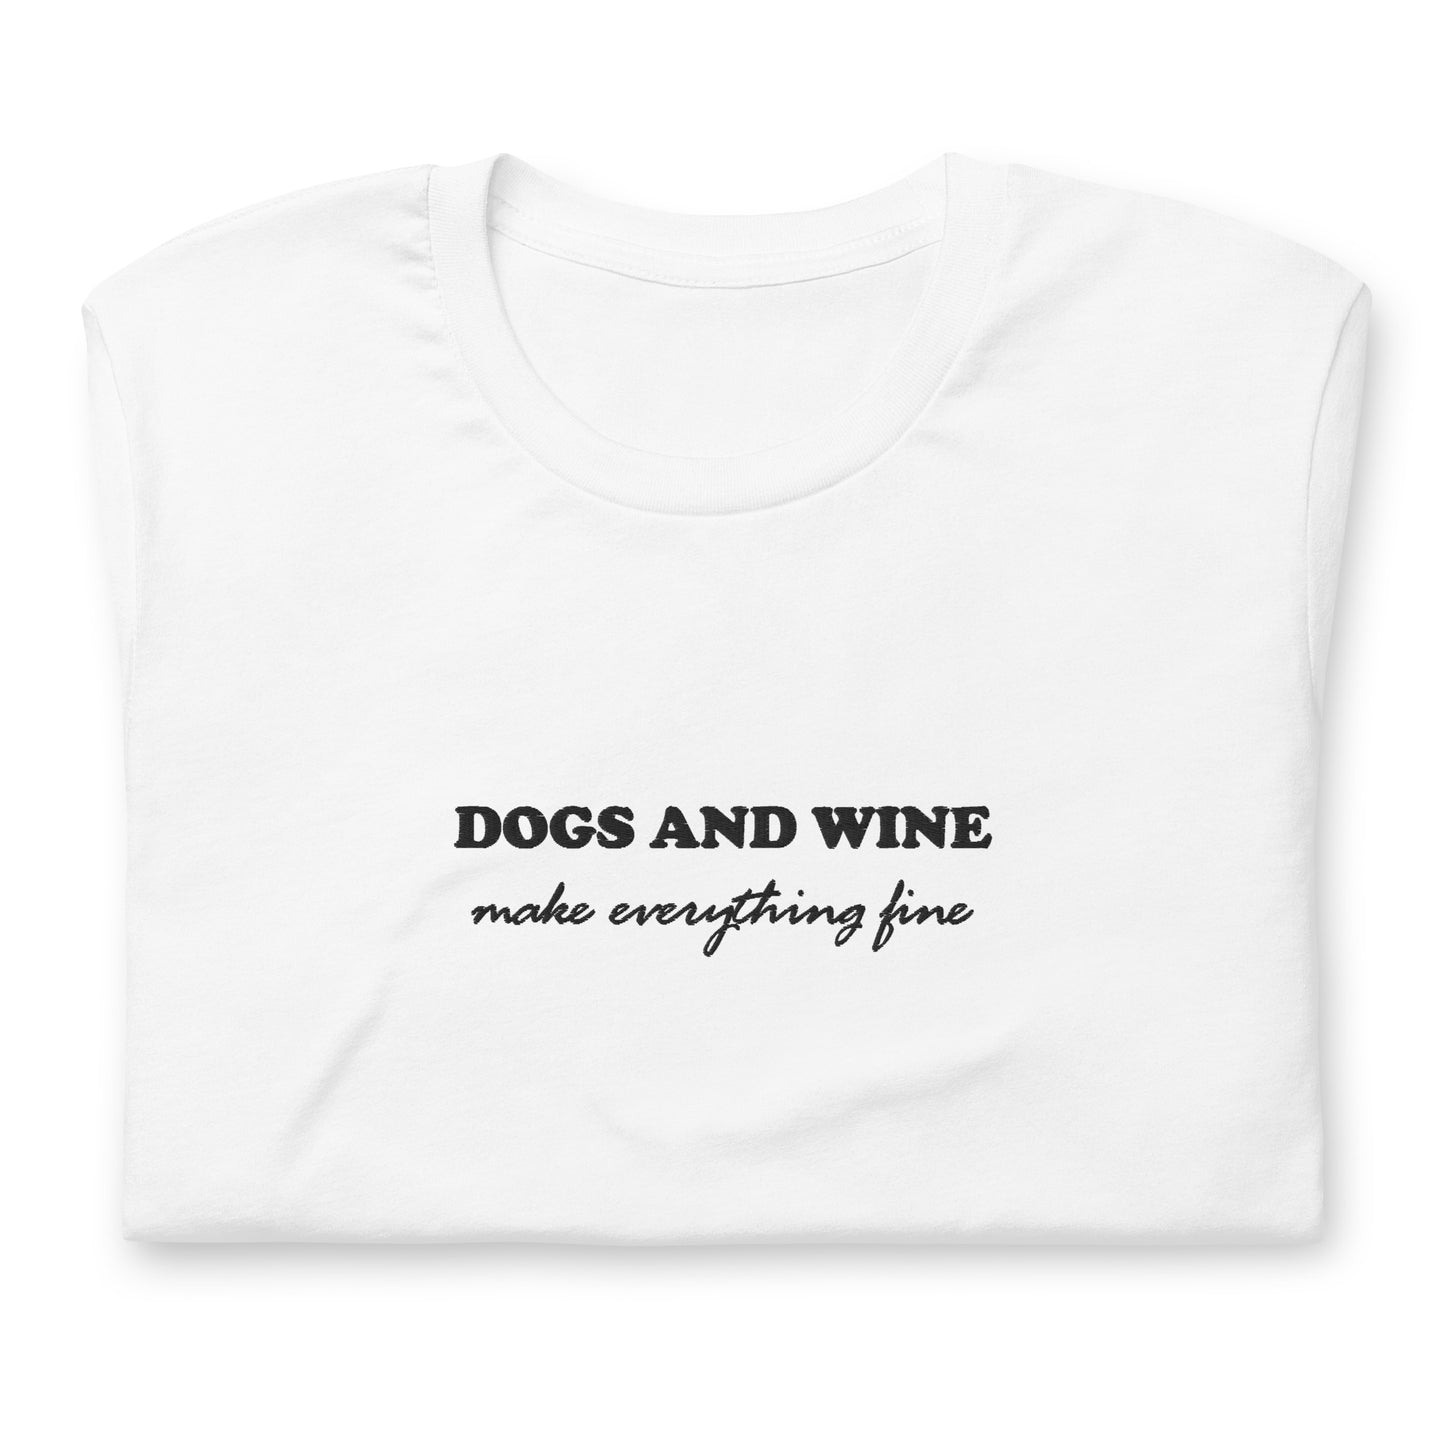 DOGS AND WINE MAKE EVERYTHING FINE - embroidered T-Shirt